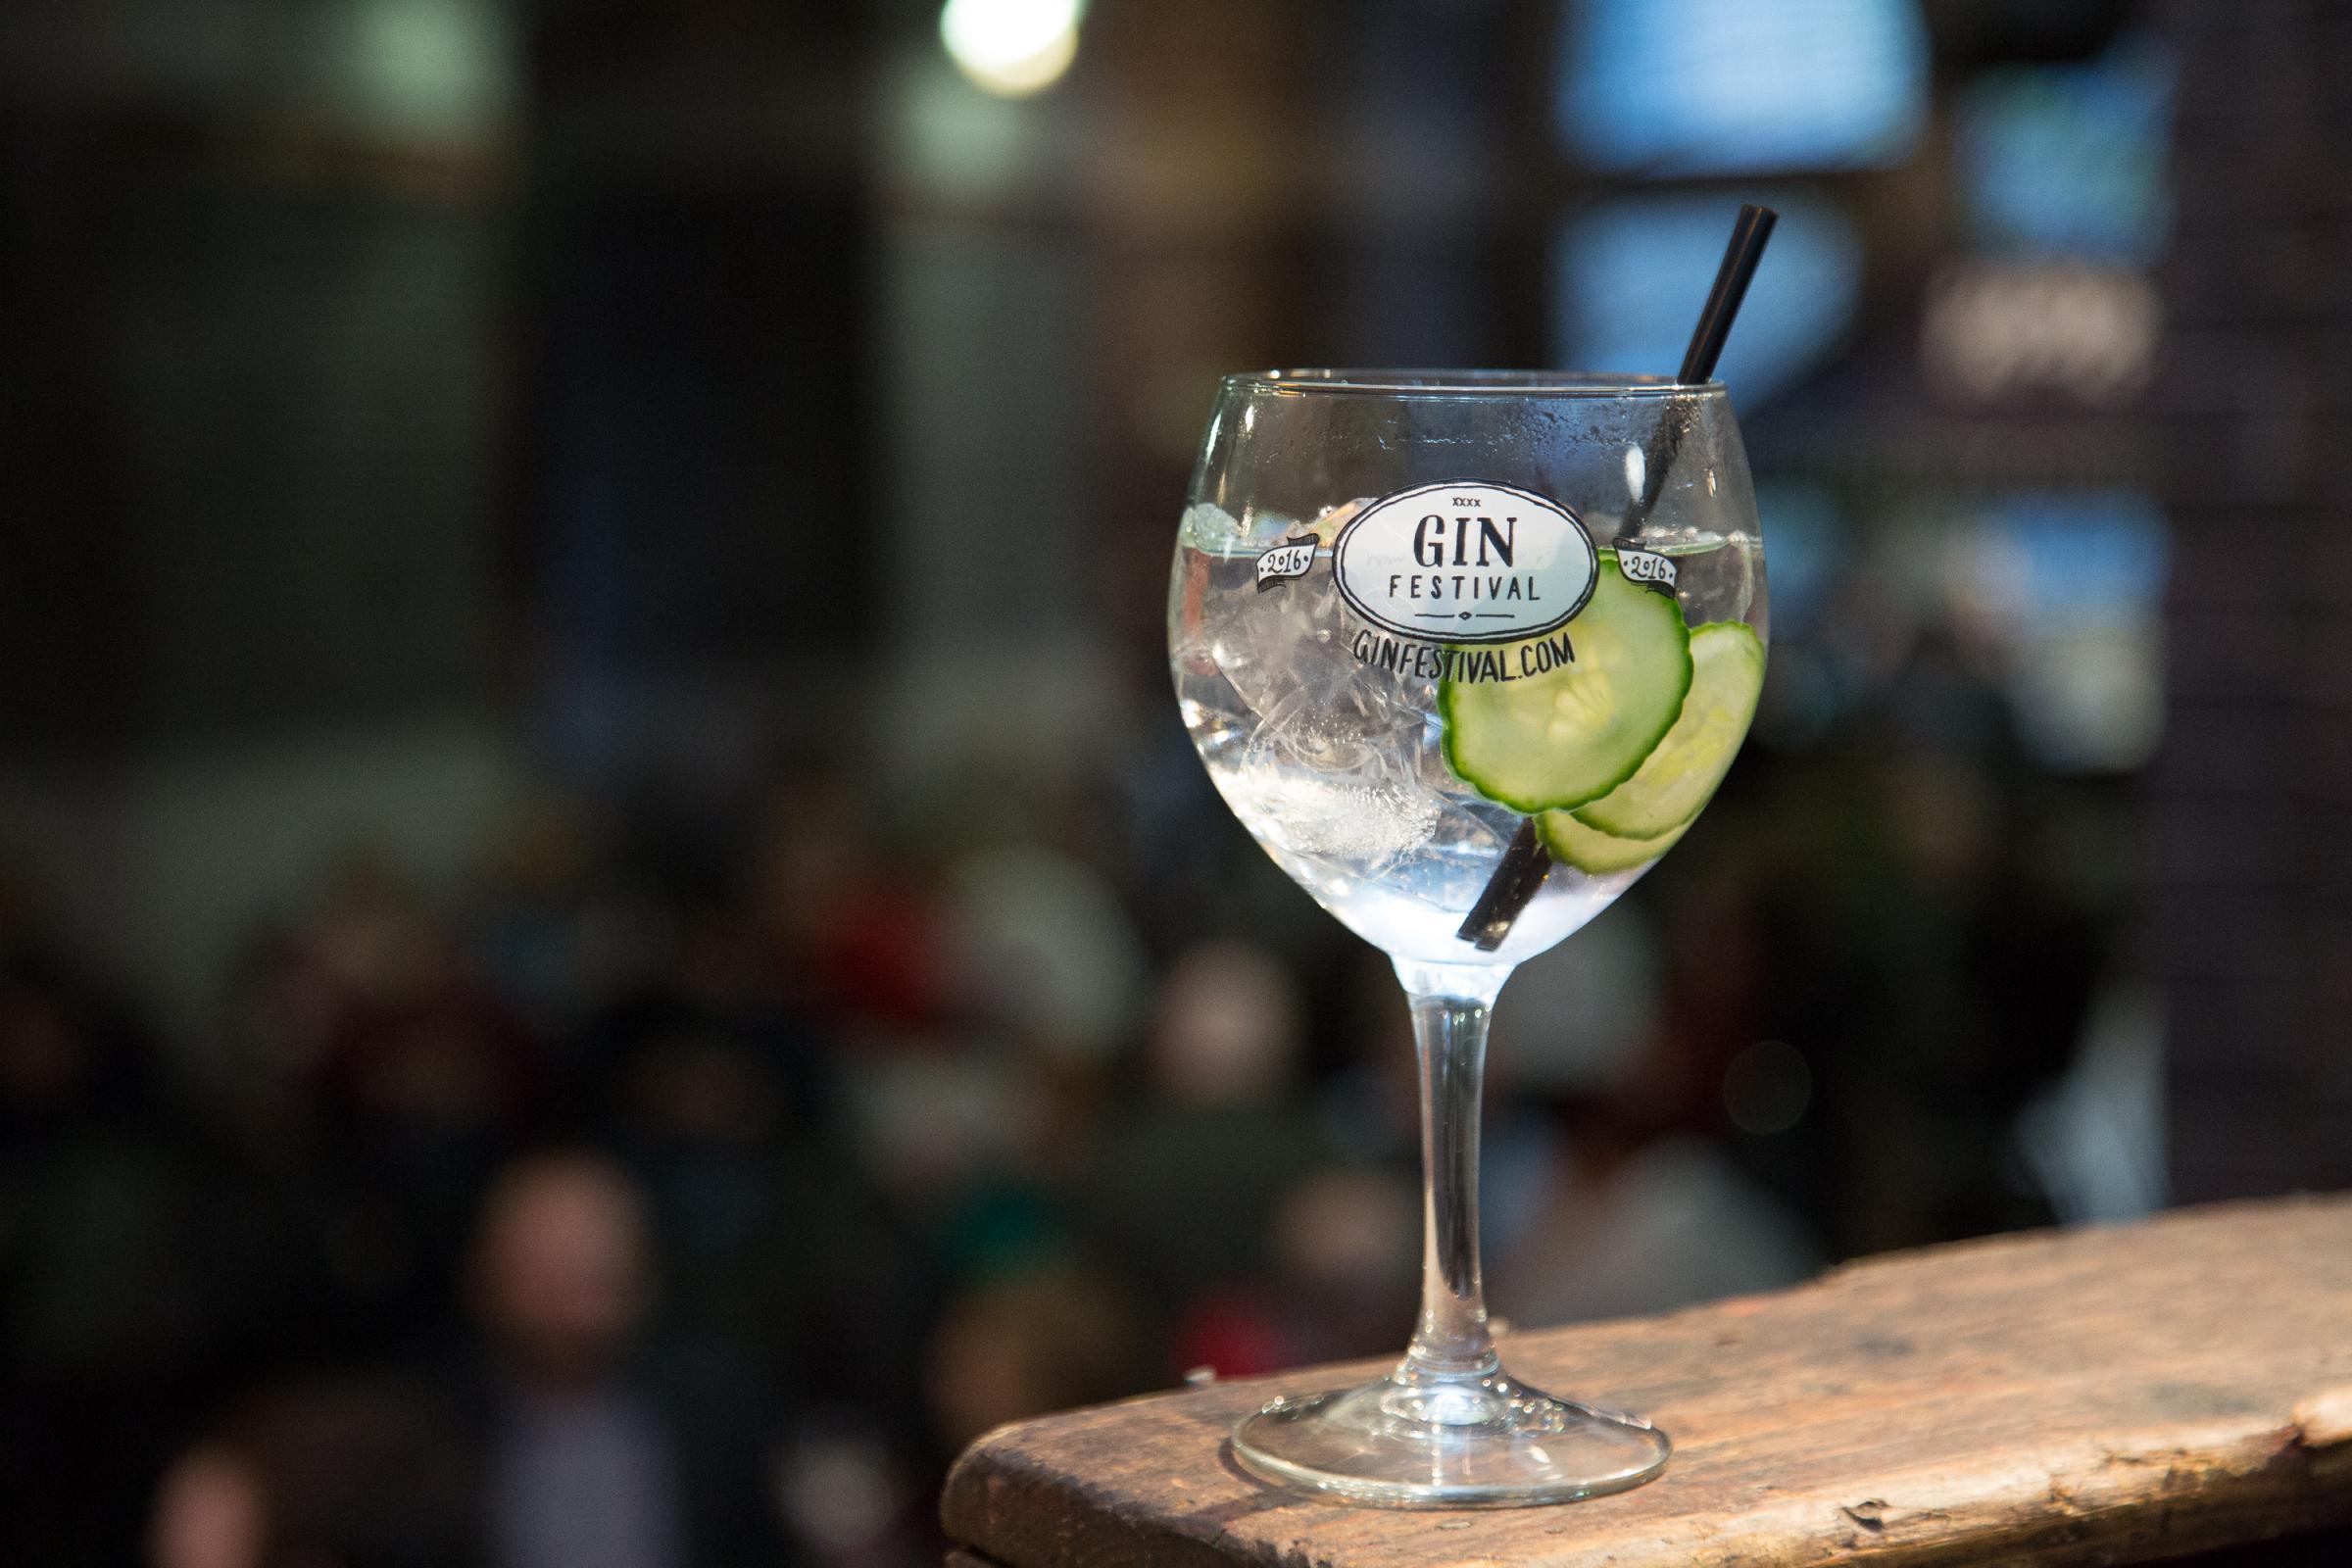 Here's how to get tickets for next month's Bournemouth Gin Festival - Bournemouth Echo